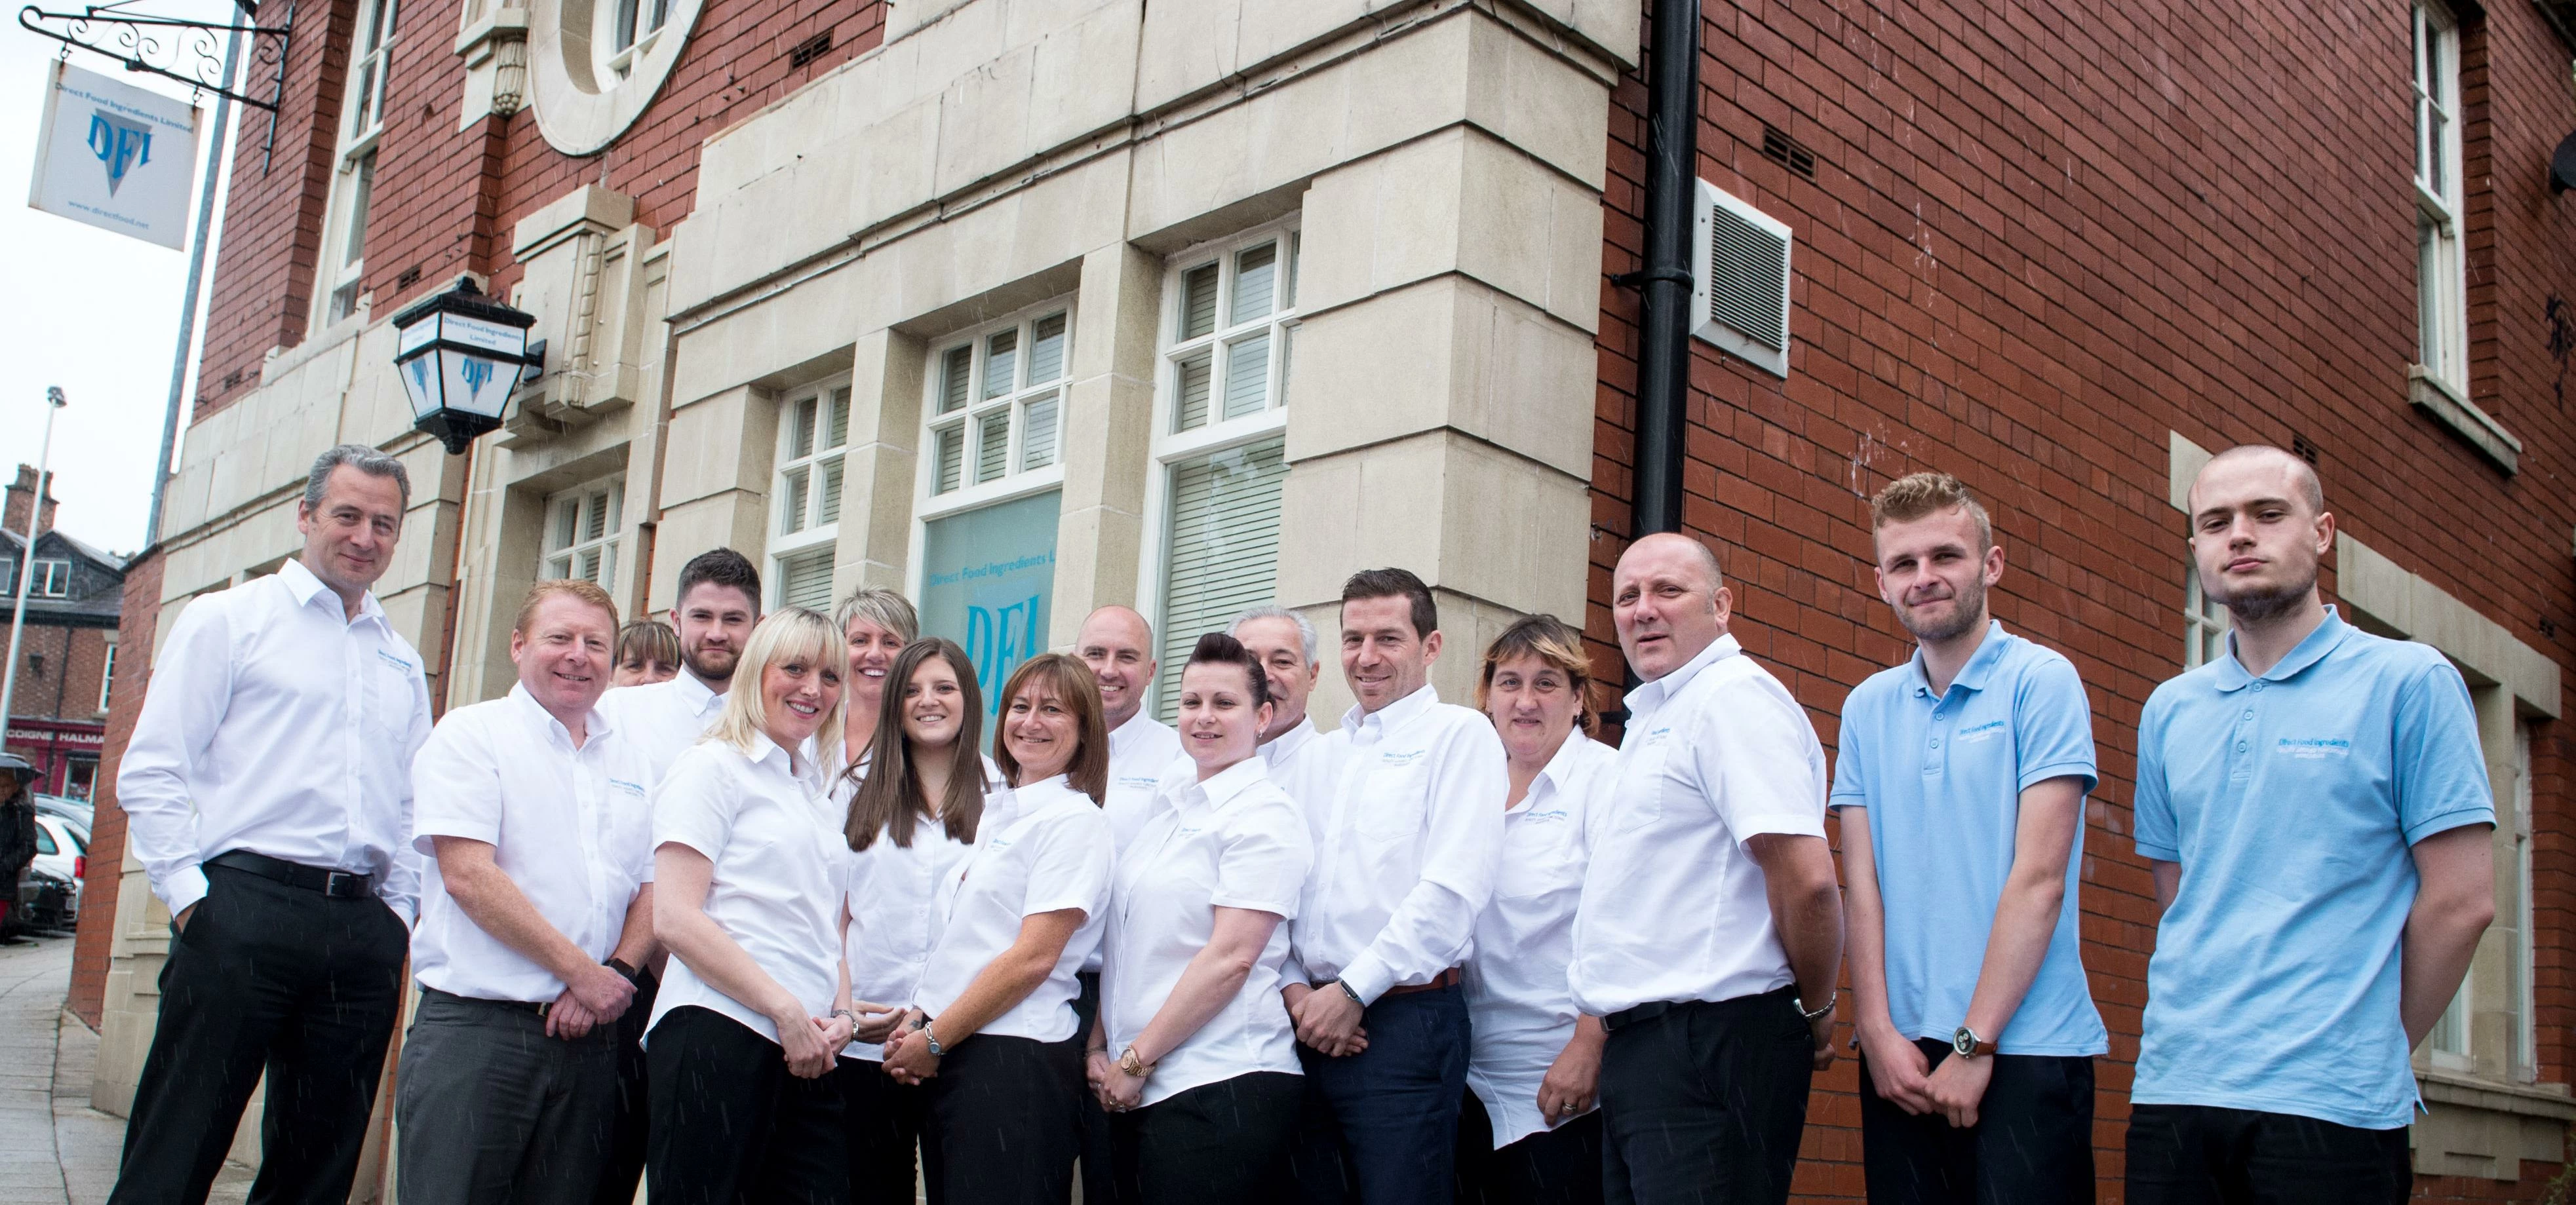 The Whole Direct Food Ingredients Team